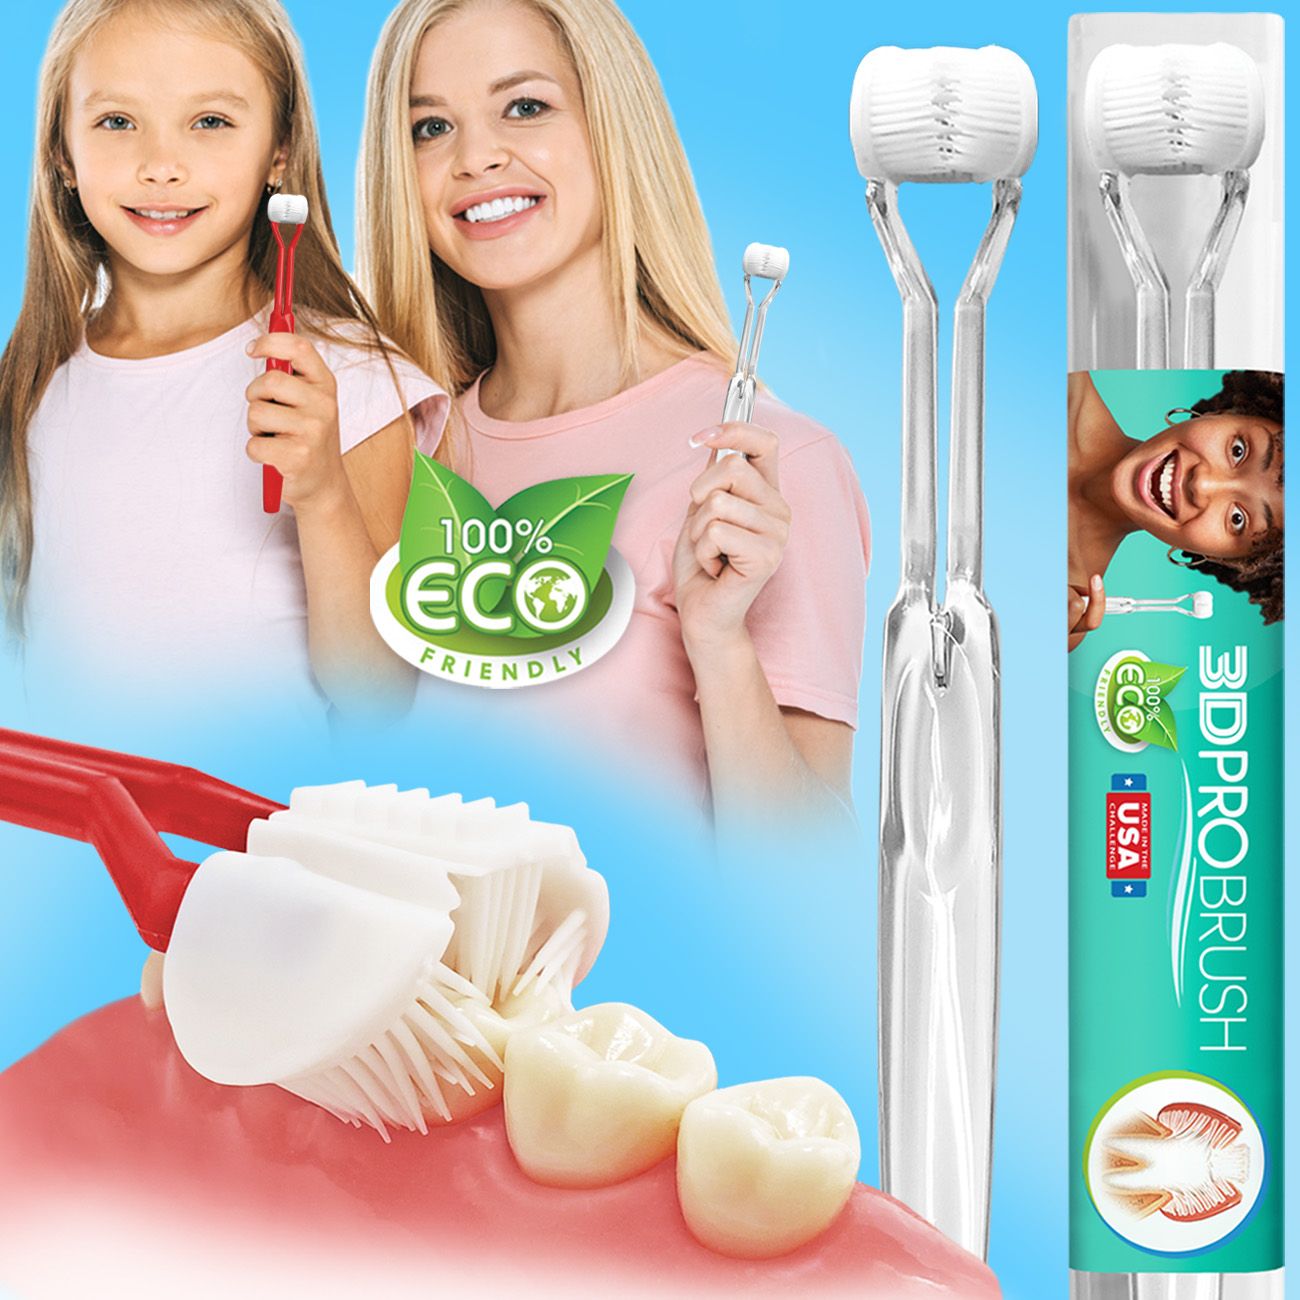 3D PRO BRUSH 3-Sided Toothbrush | Eco-Friendly | Made in the USA